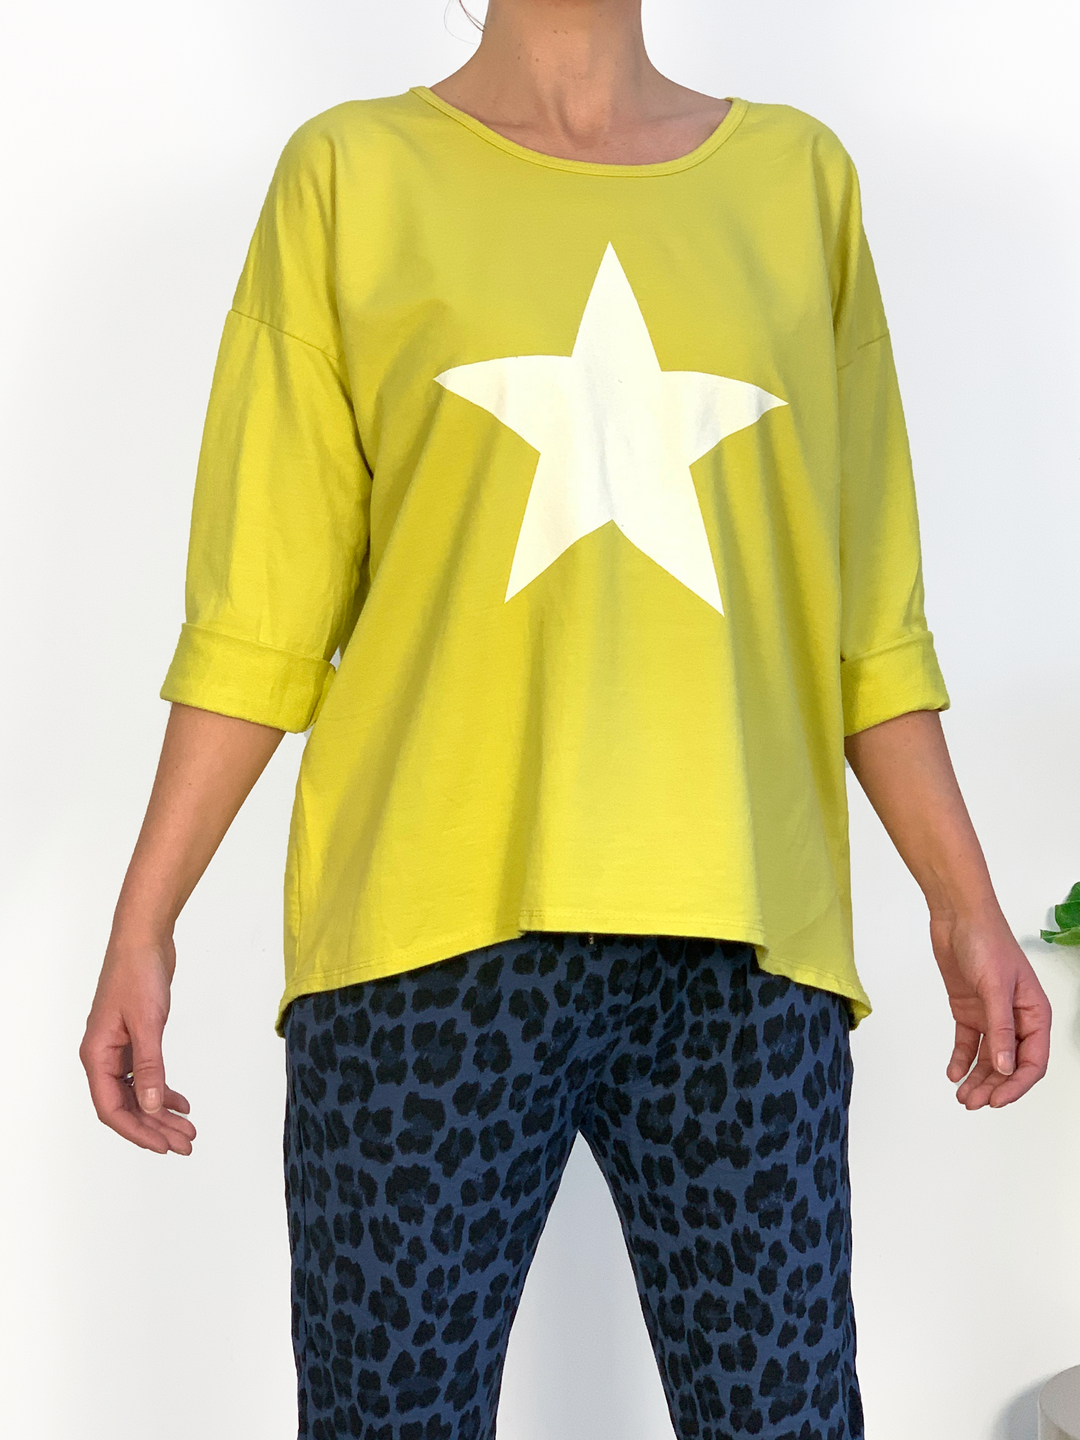 Acid Yellow Sweater with White star in centre